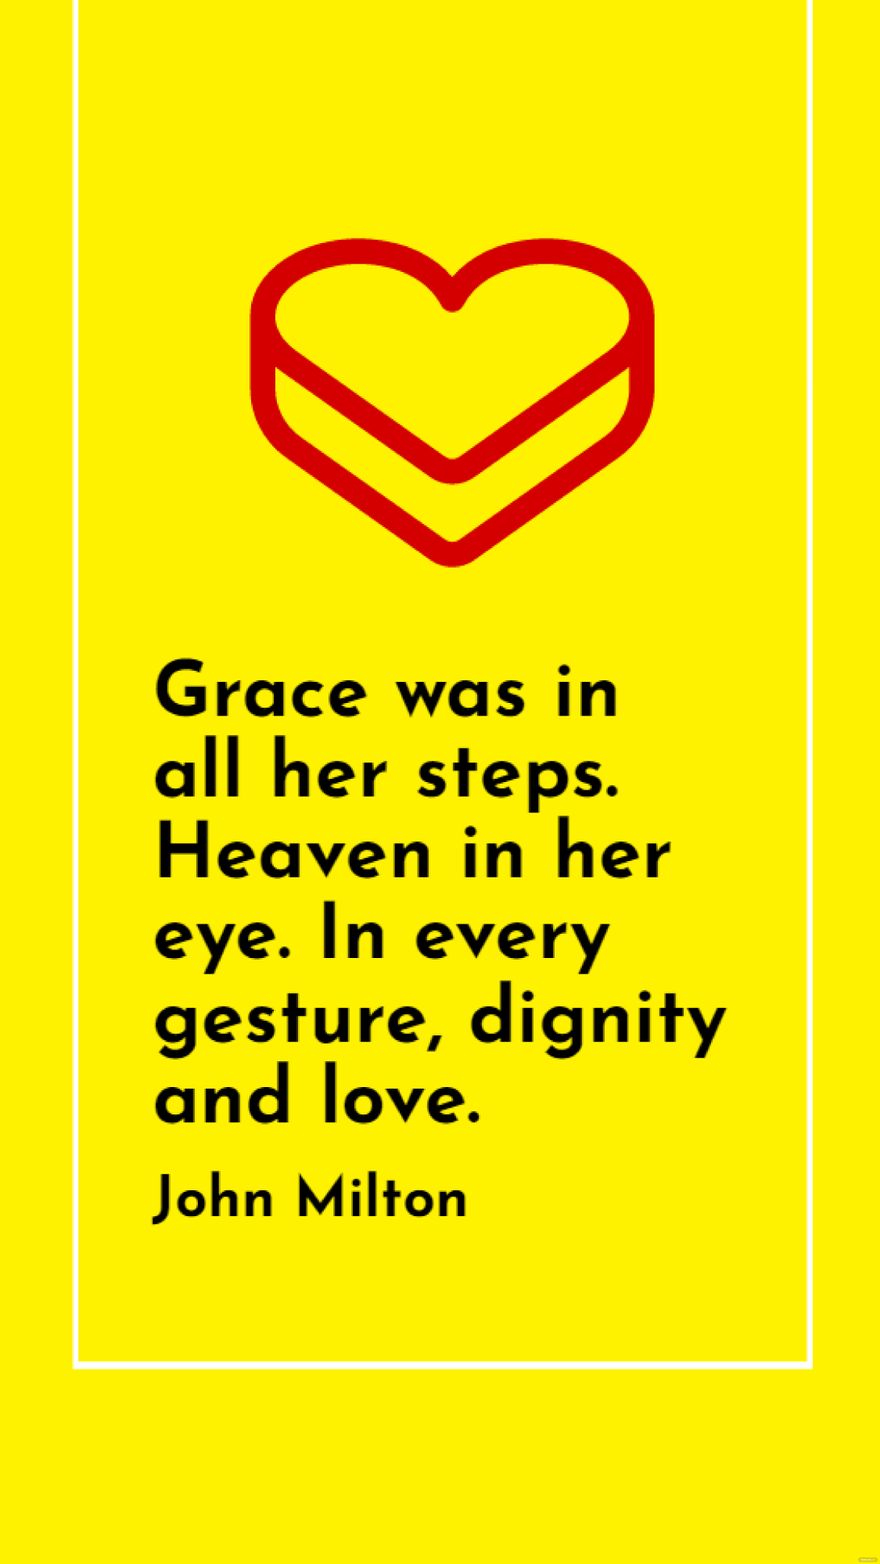 John Milton - Grace was in all her steps. Heaven in her eye. In every gesture, dignity and love.